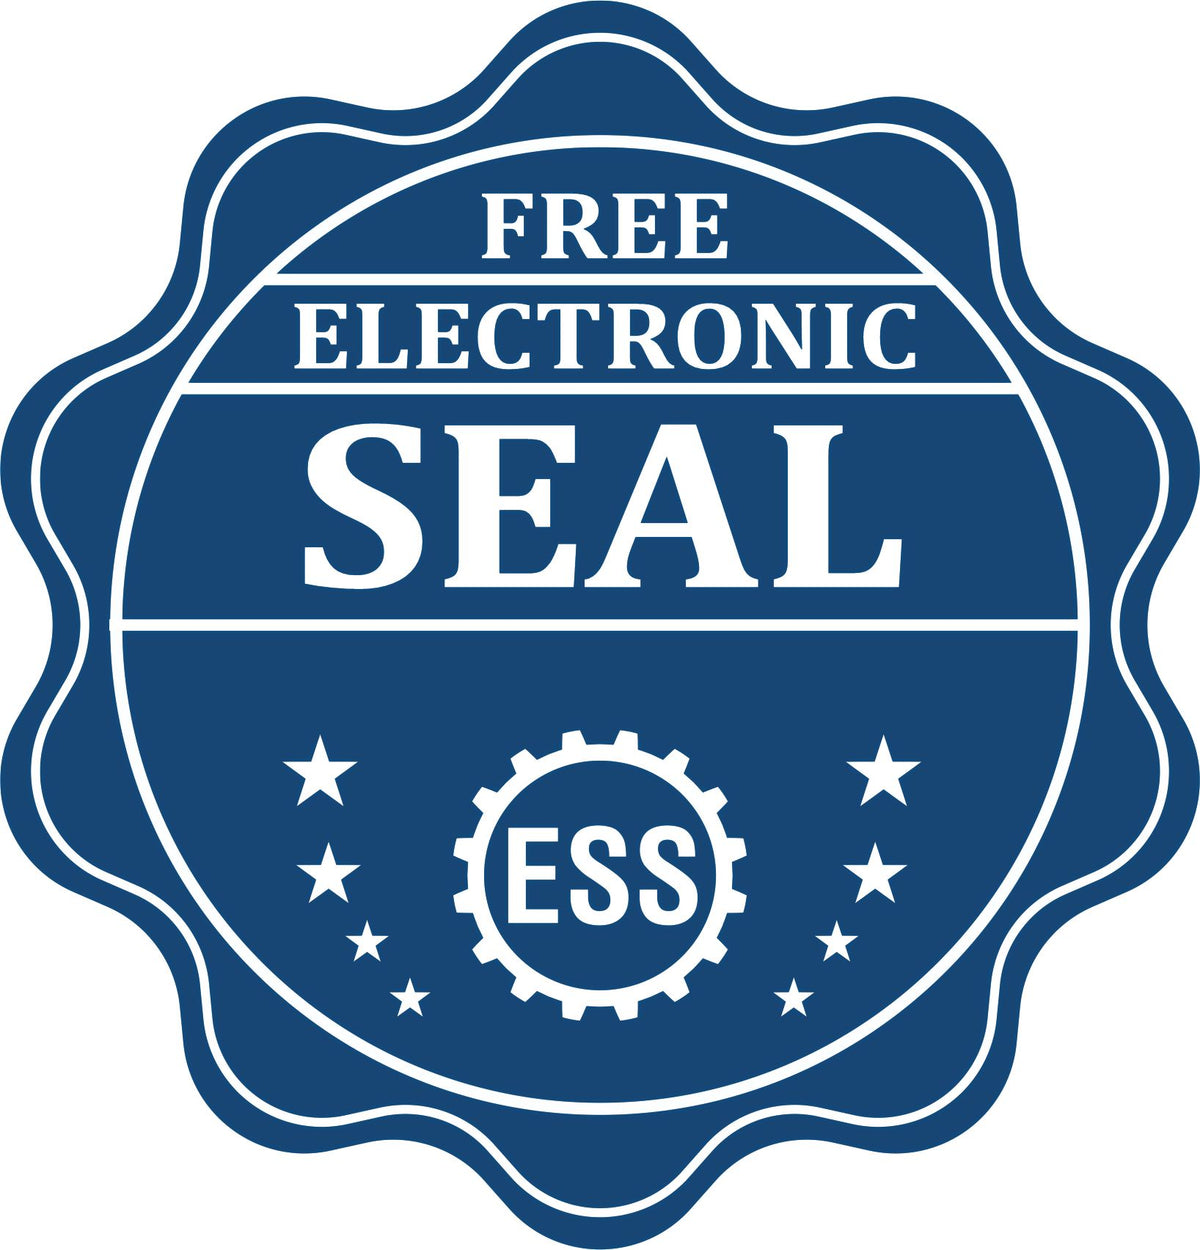 A badge showing a free electronic seal for the Wooden Handle Vermont State Seal Notary Public Stamp with stars and the ESS gear on the emblem.